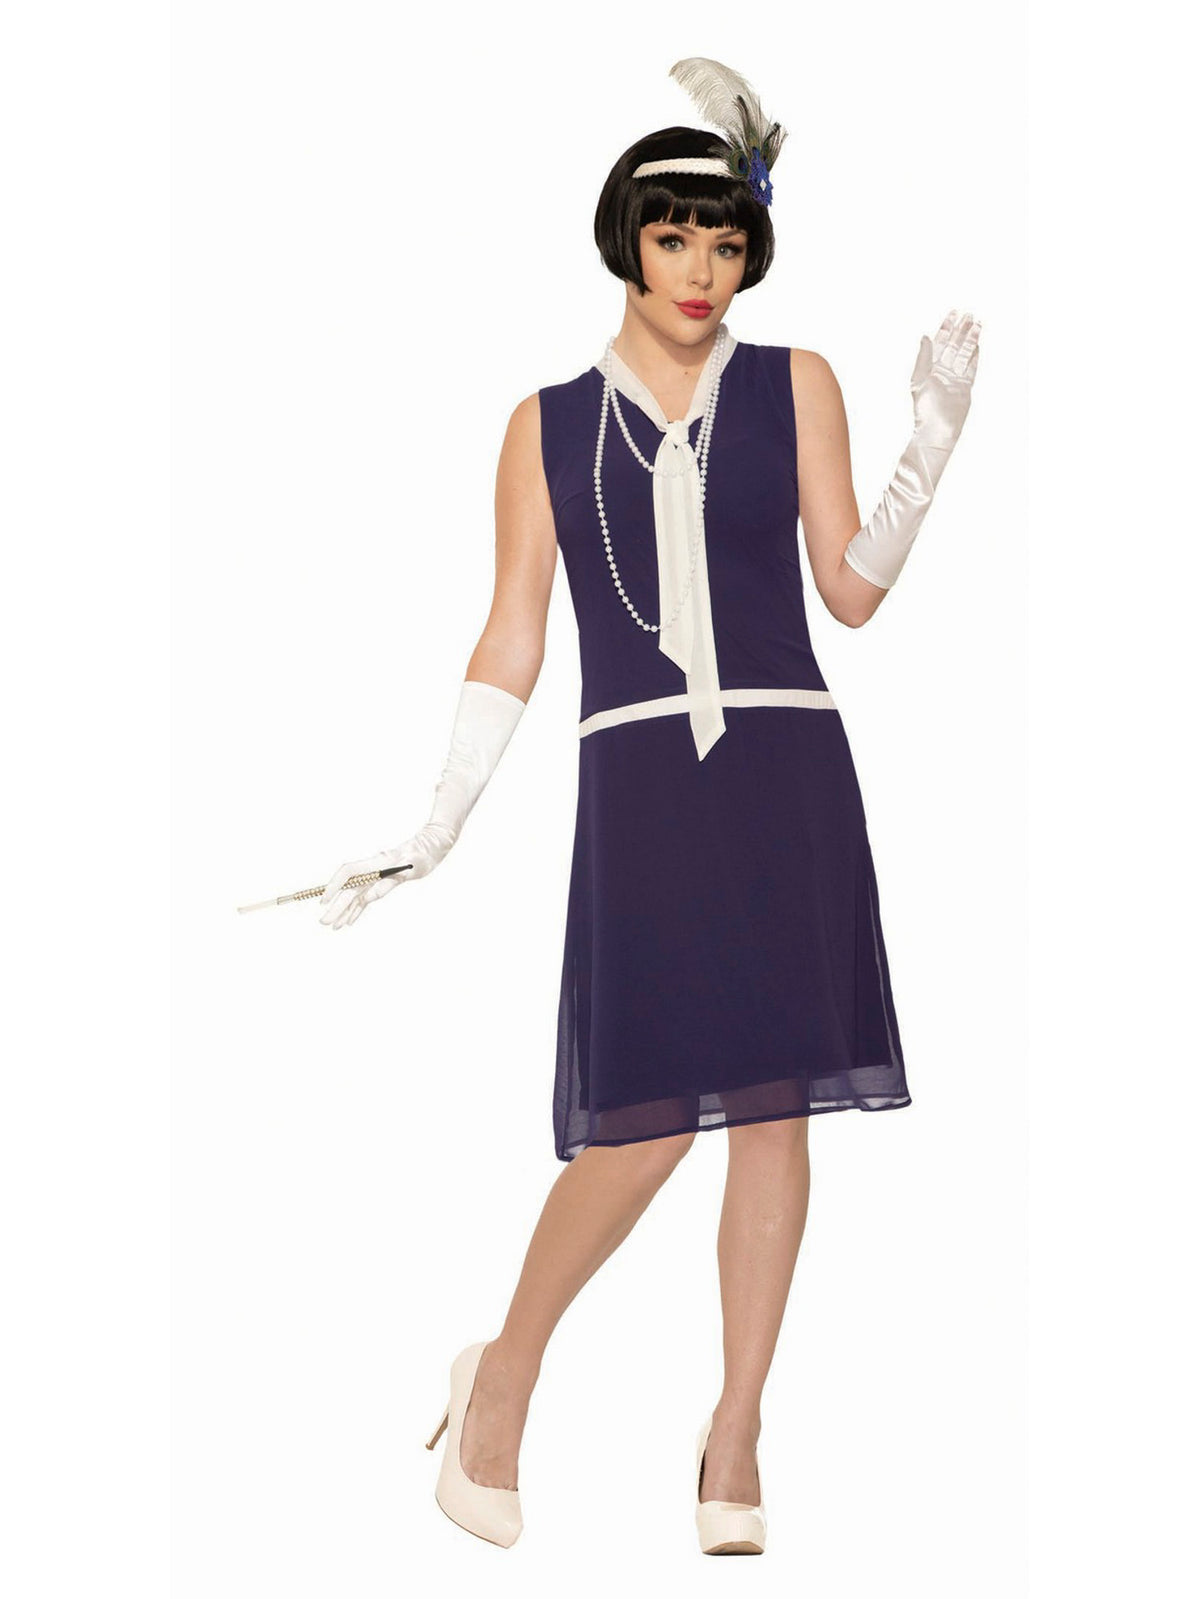 Daydreaming Daisy Costume for Women — Costume Super Center